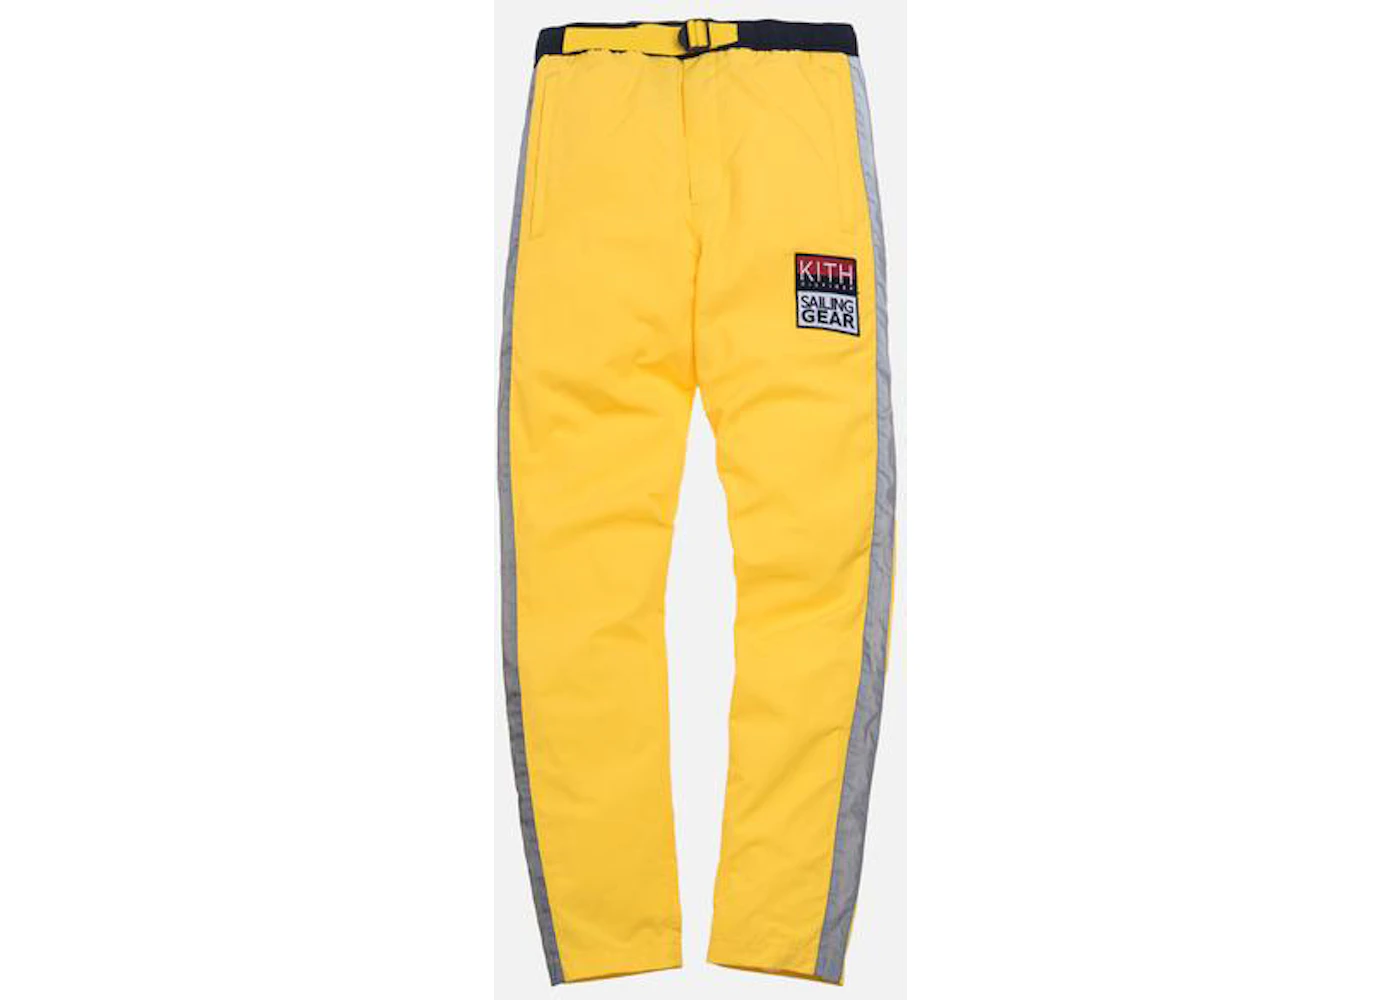 Kith x Tommy Hilfiger Tech Pant Yellow Men's - SS19 - US